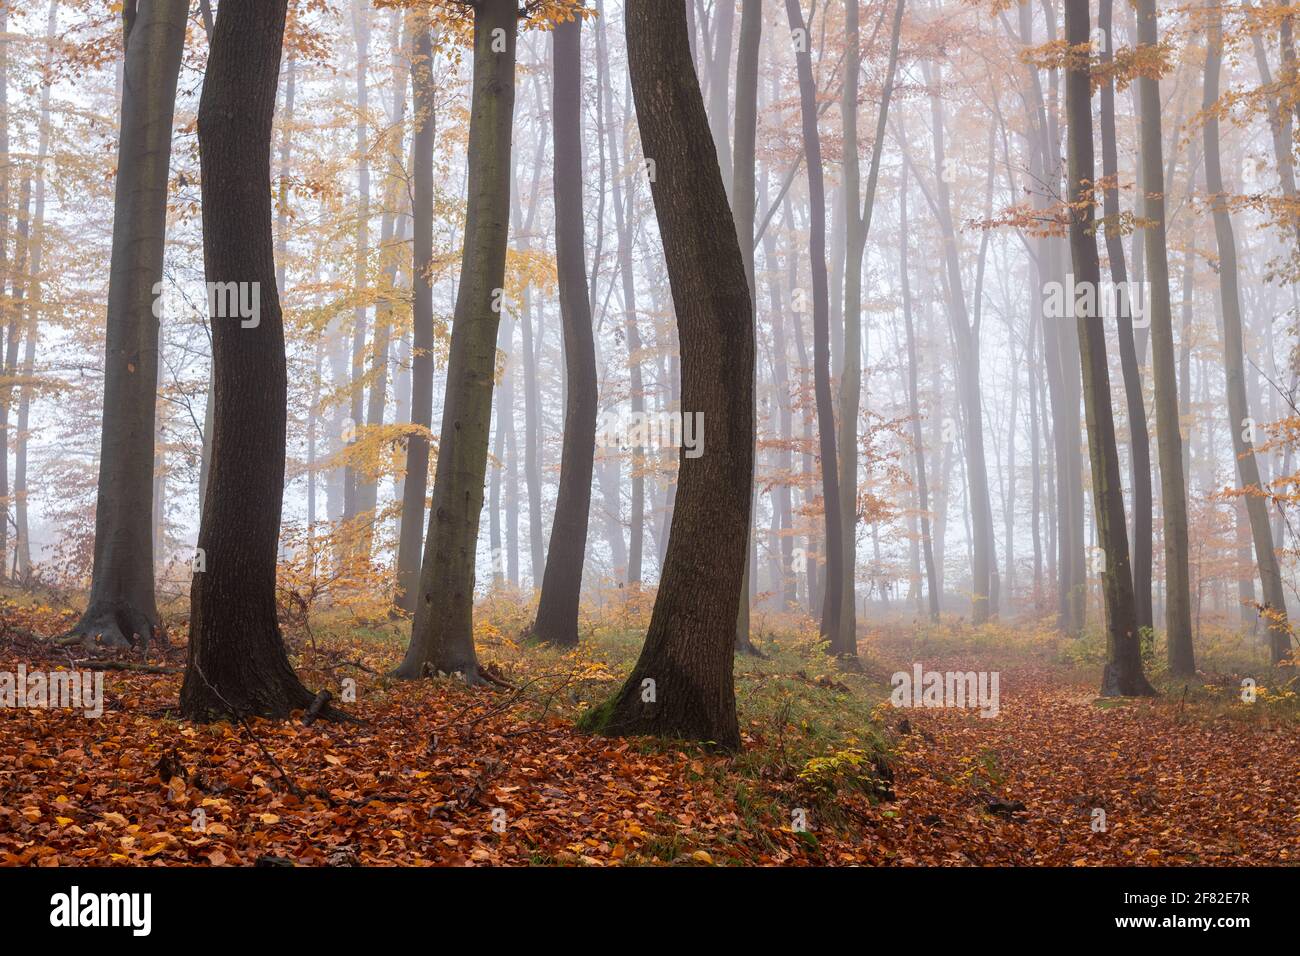 Autumn misty forest. Fog in woodland. Decidious trees in nature. Beech tree and footpath with fallen leaves Stock Photo